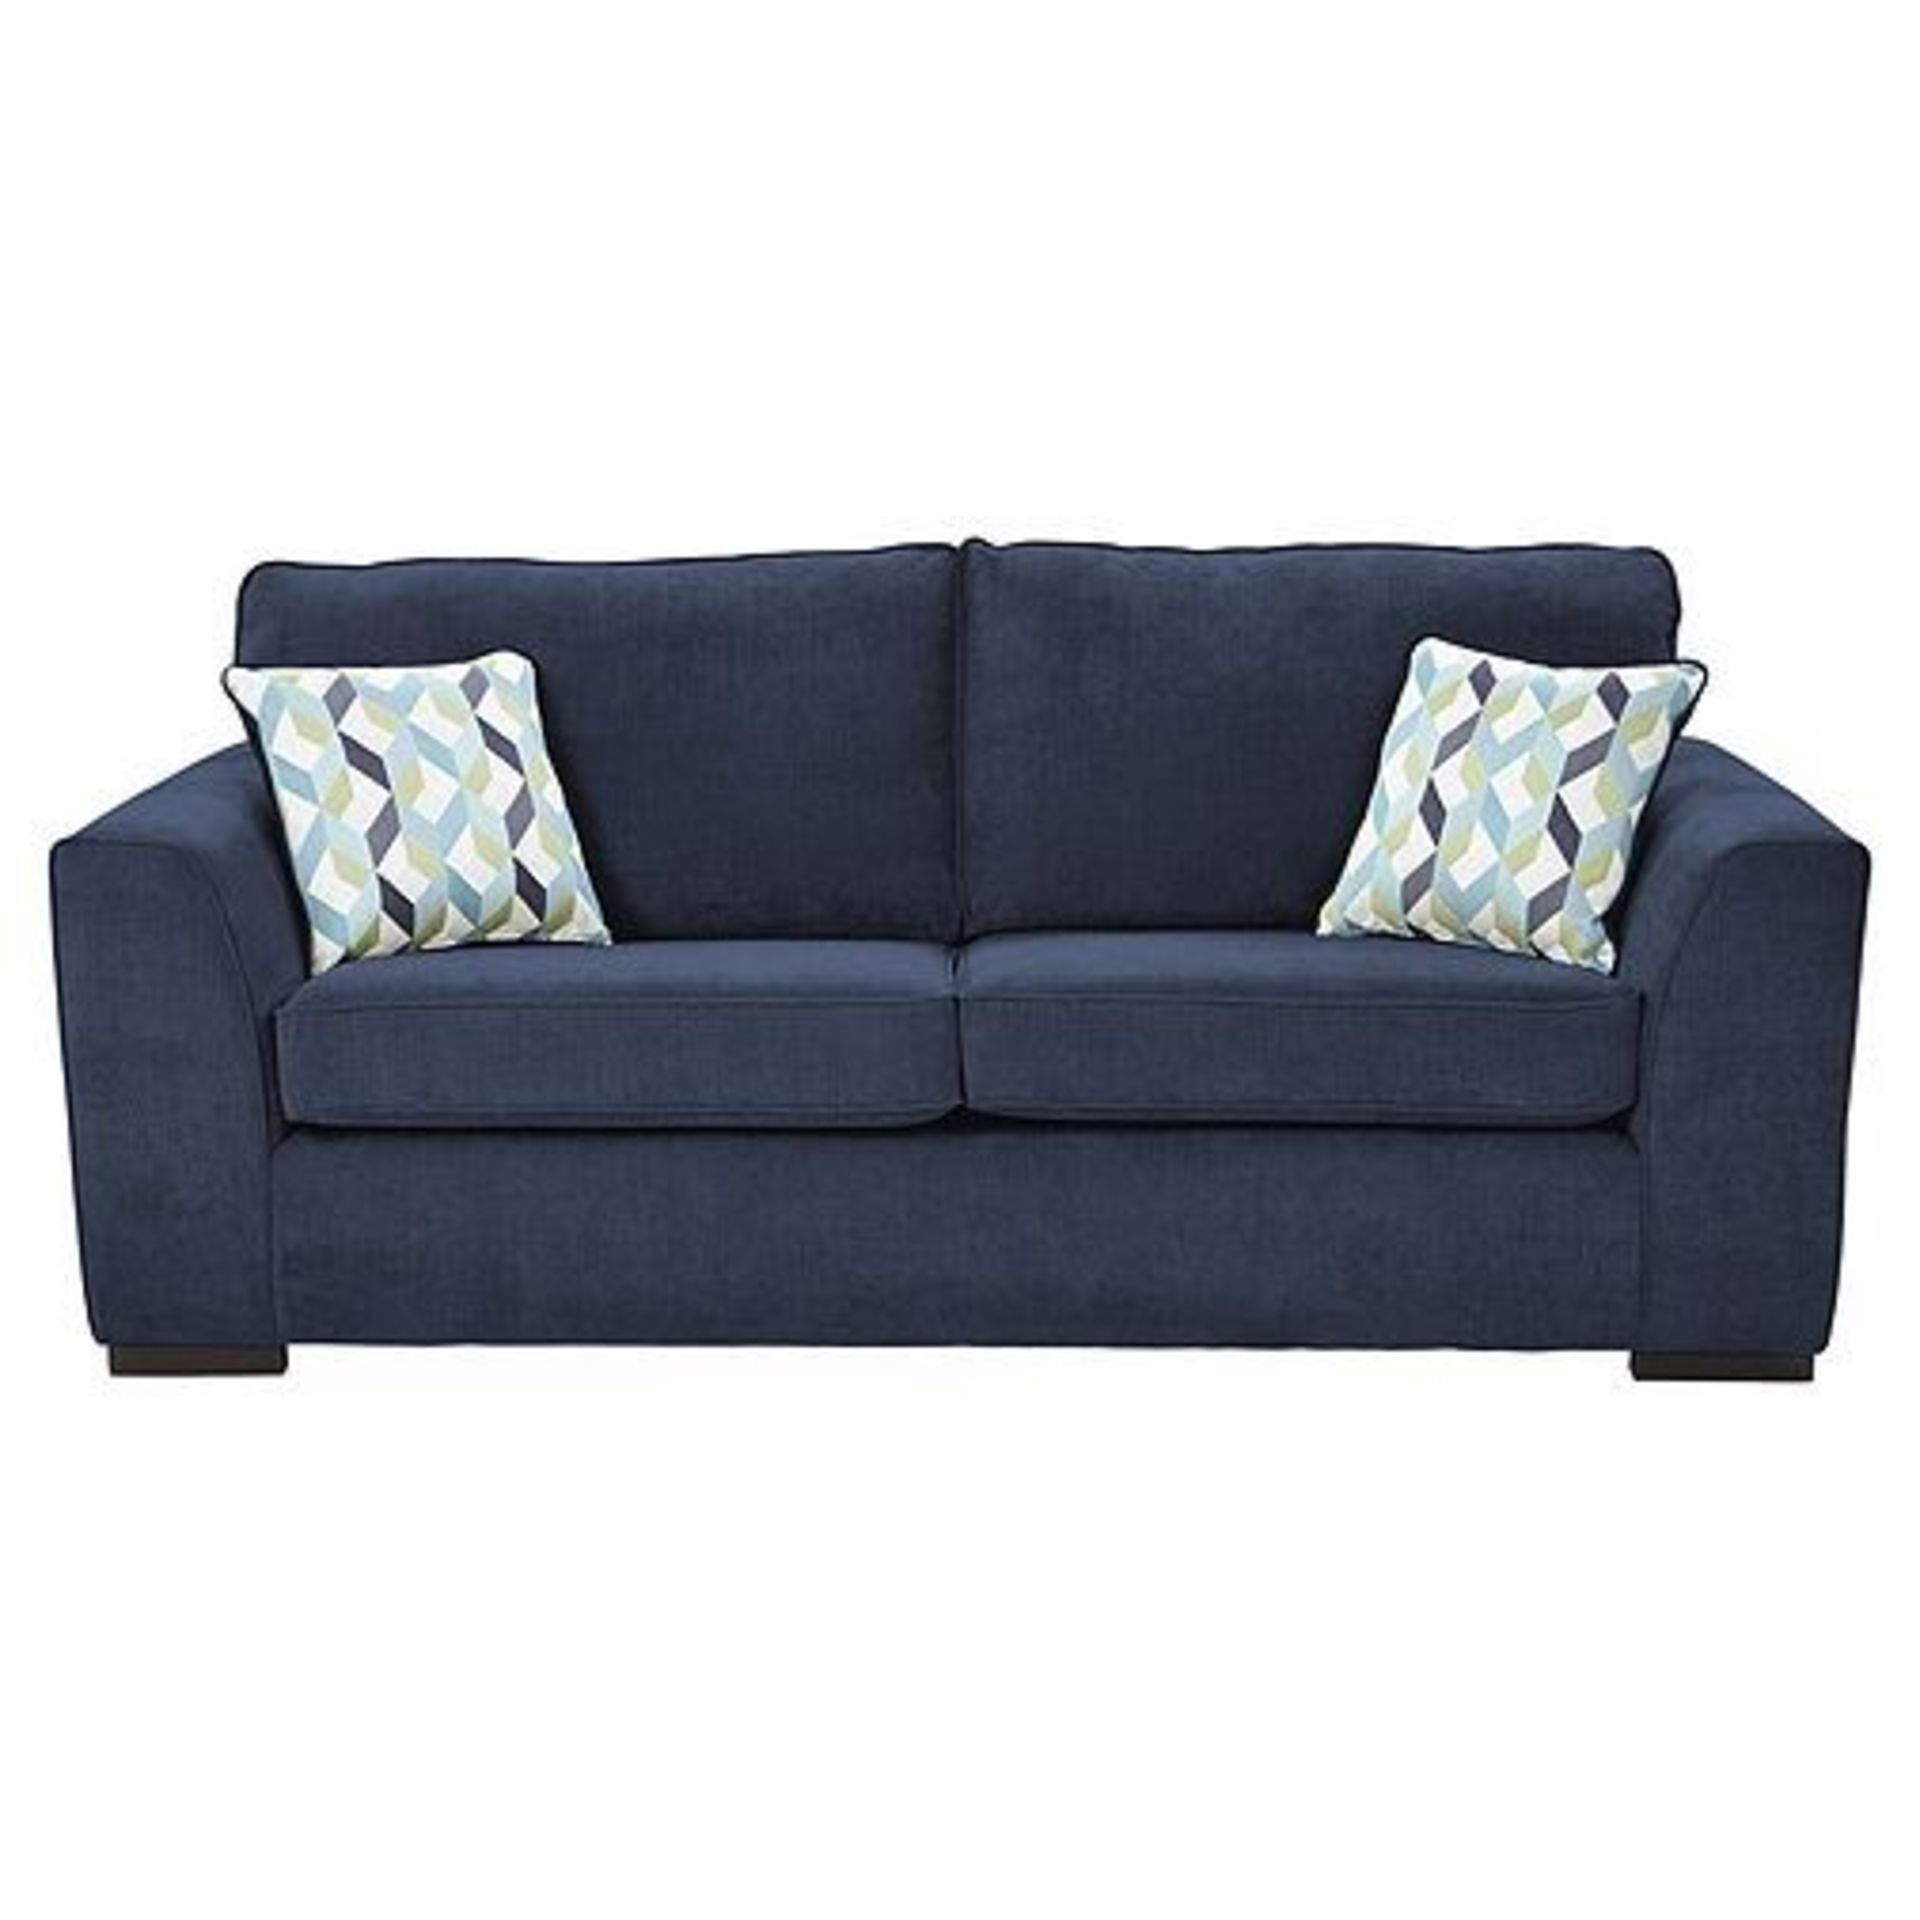 1 BRAND NEW BAGGED BOSTON MEDIUM 2.5 SEATER SOFA IN NAVY / 42592 (VIEWING HIGHLY RECOMMENDED)